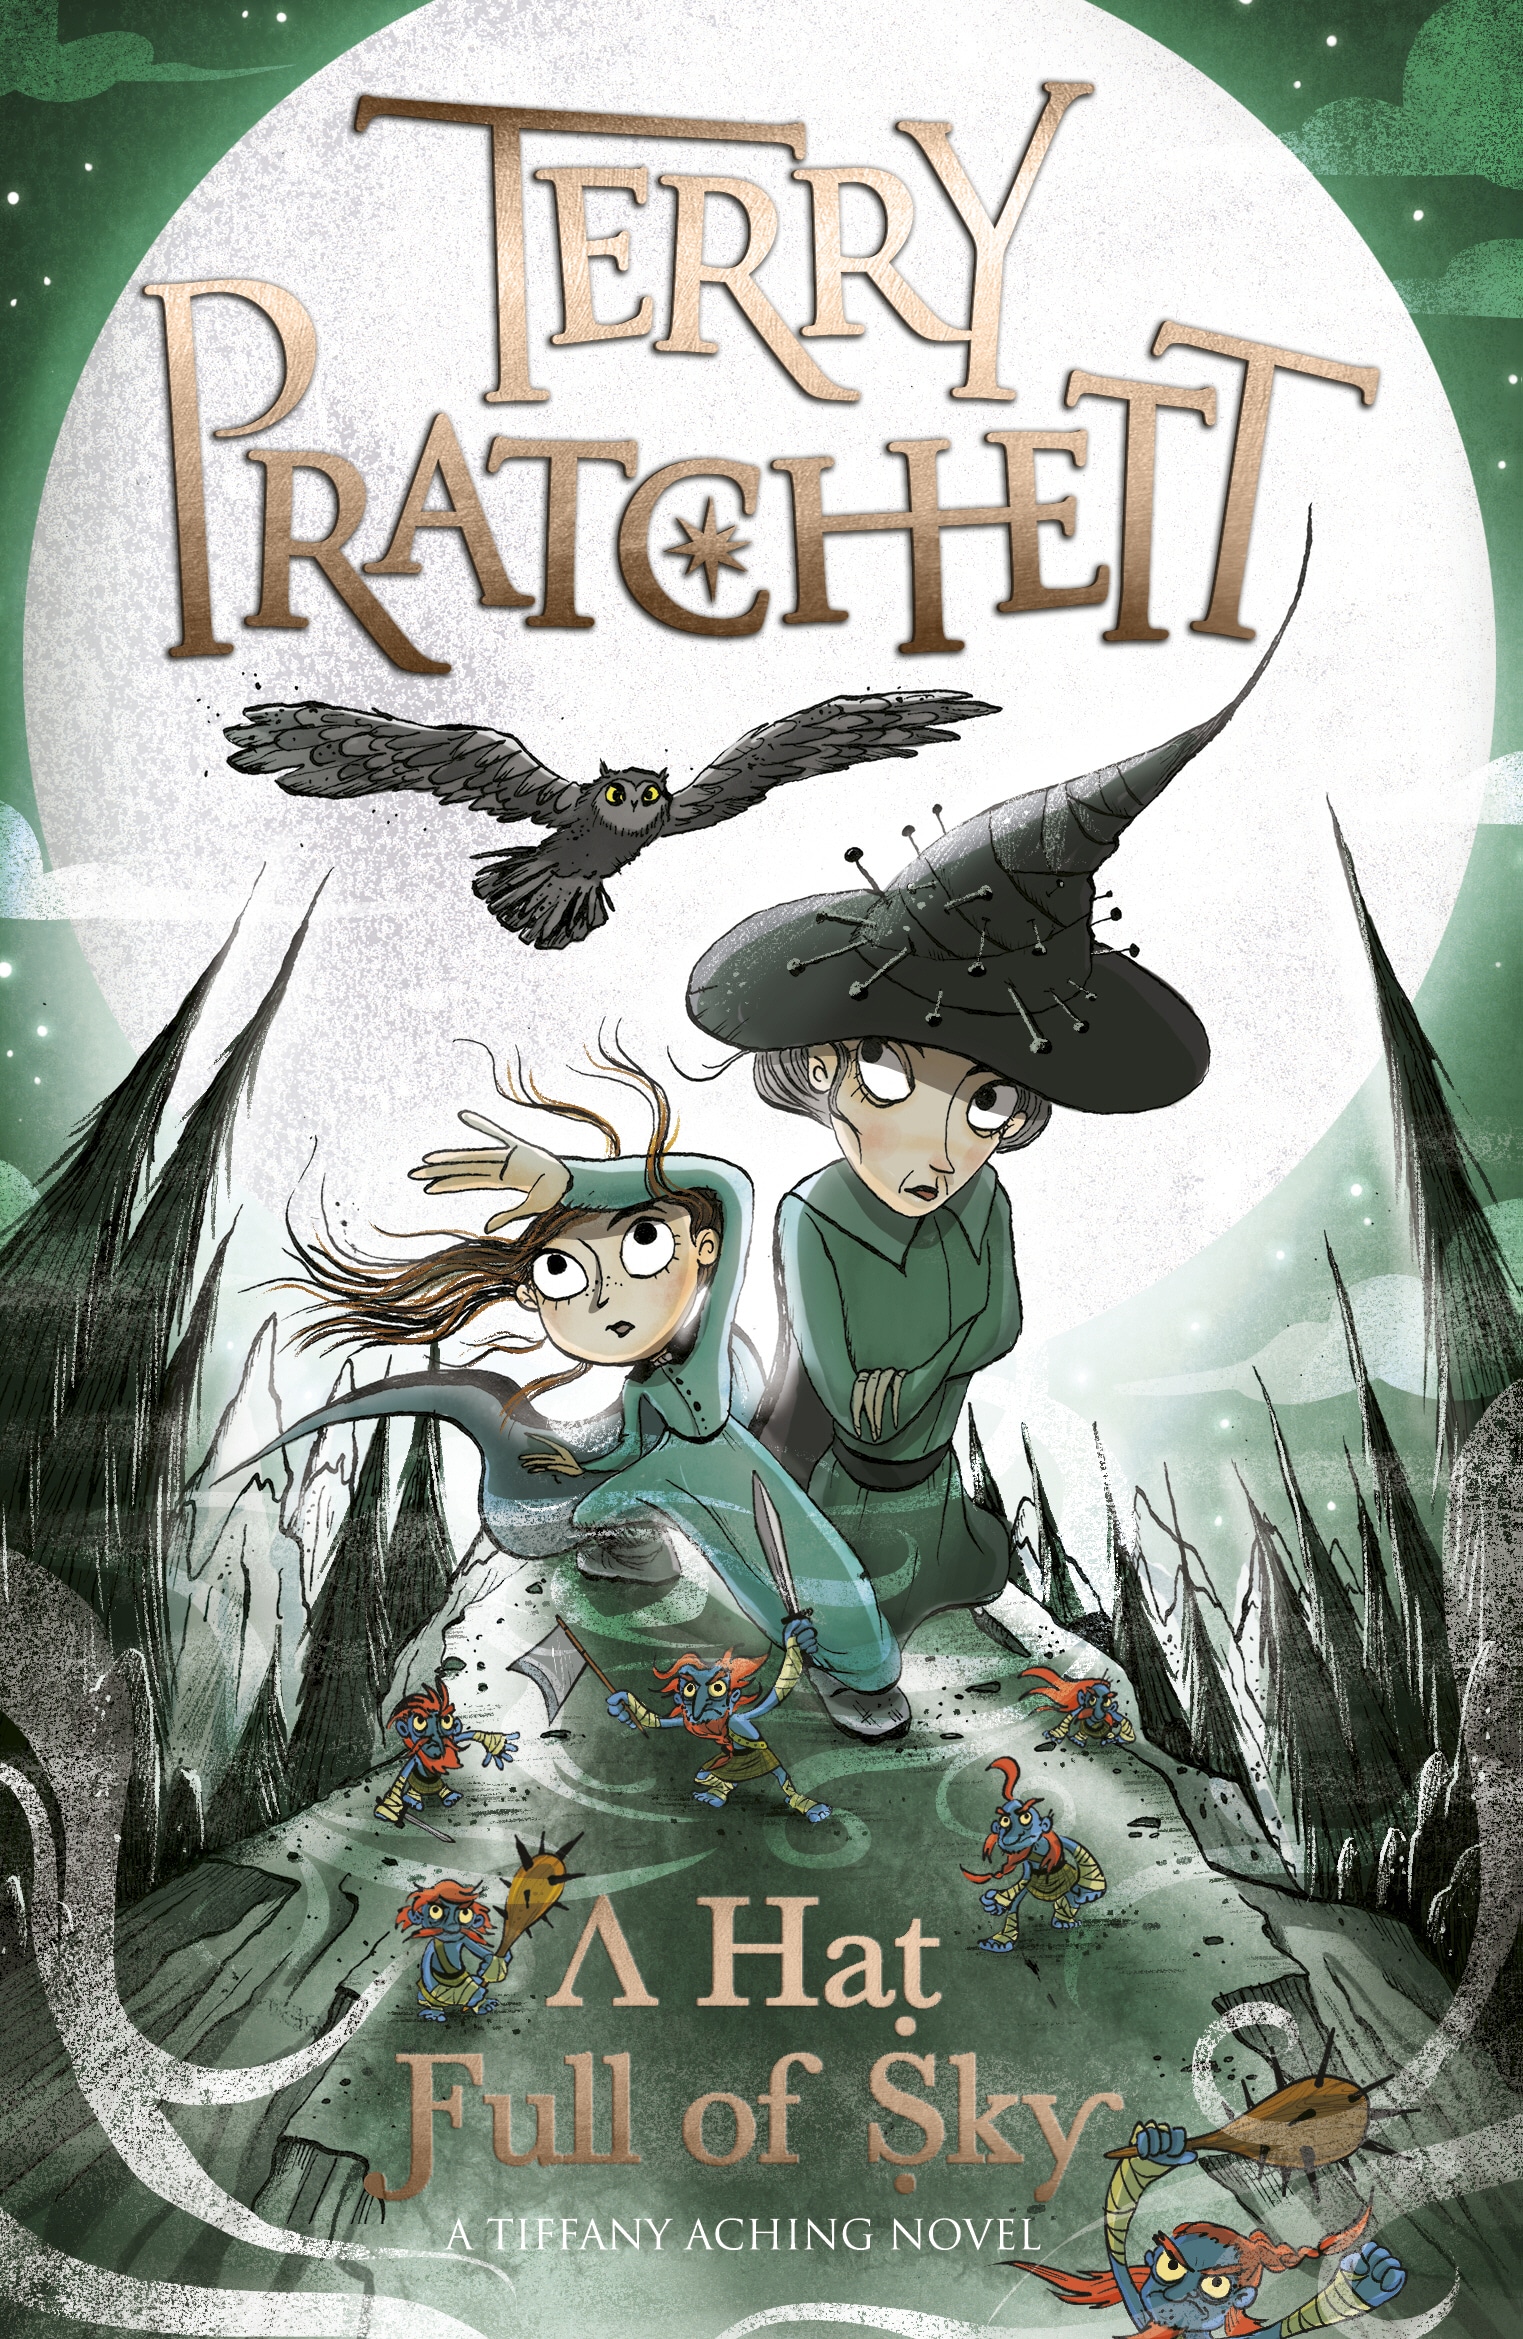 Book “A Hat Full of Sky” by Terry Pratchett — May 25, 2017